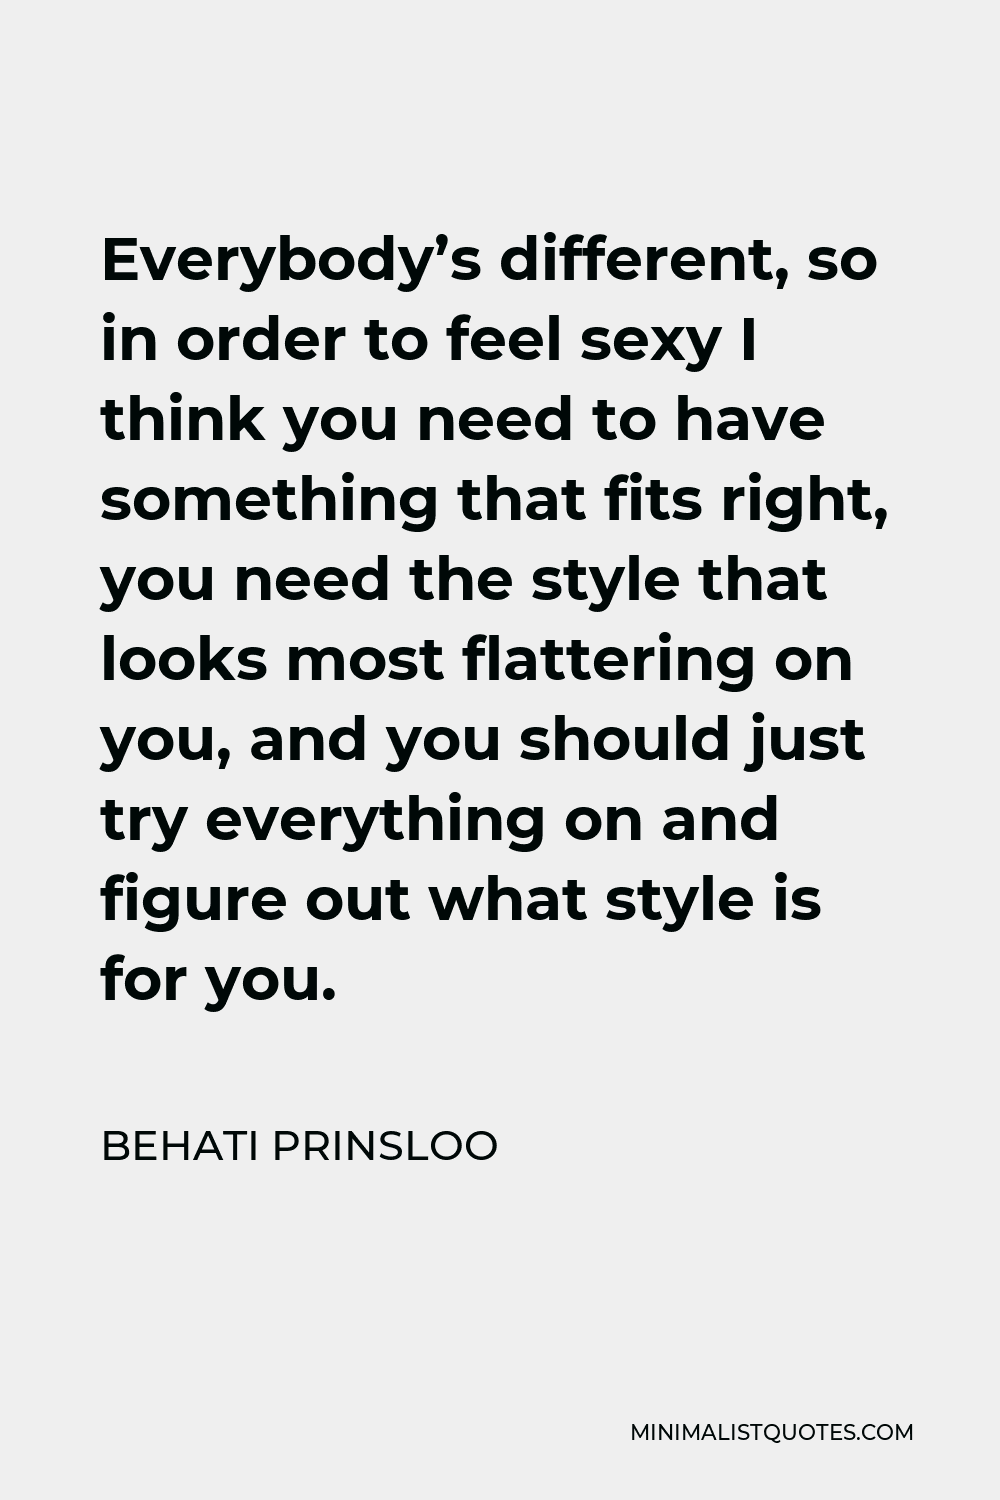 Behati Prinsloo Quote - Everybody’s different, so in order to feel sexy I think you need to have something that fits right, you need the style that looks most flattering on you, and you should just try everything on and figure out what style is for you.